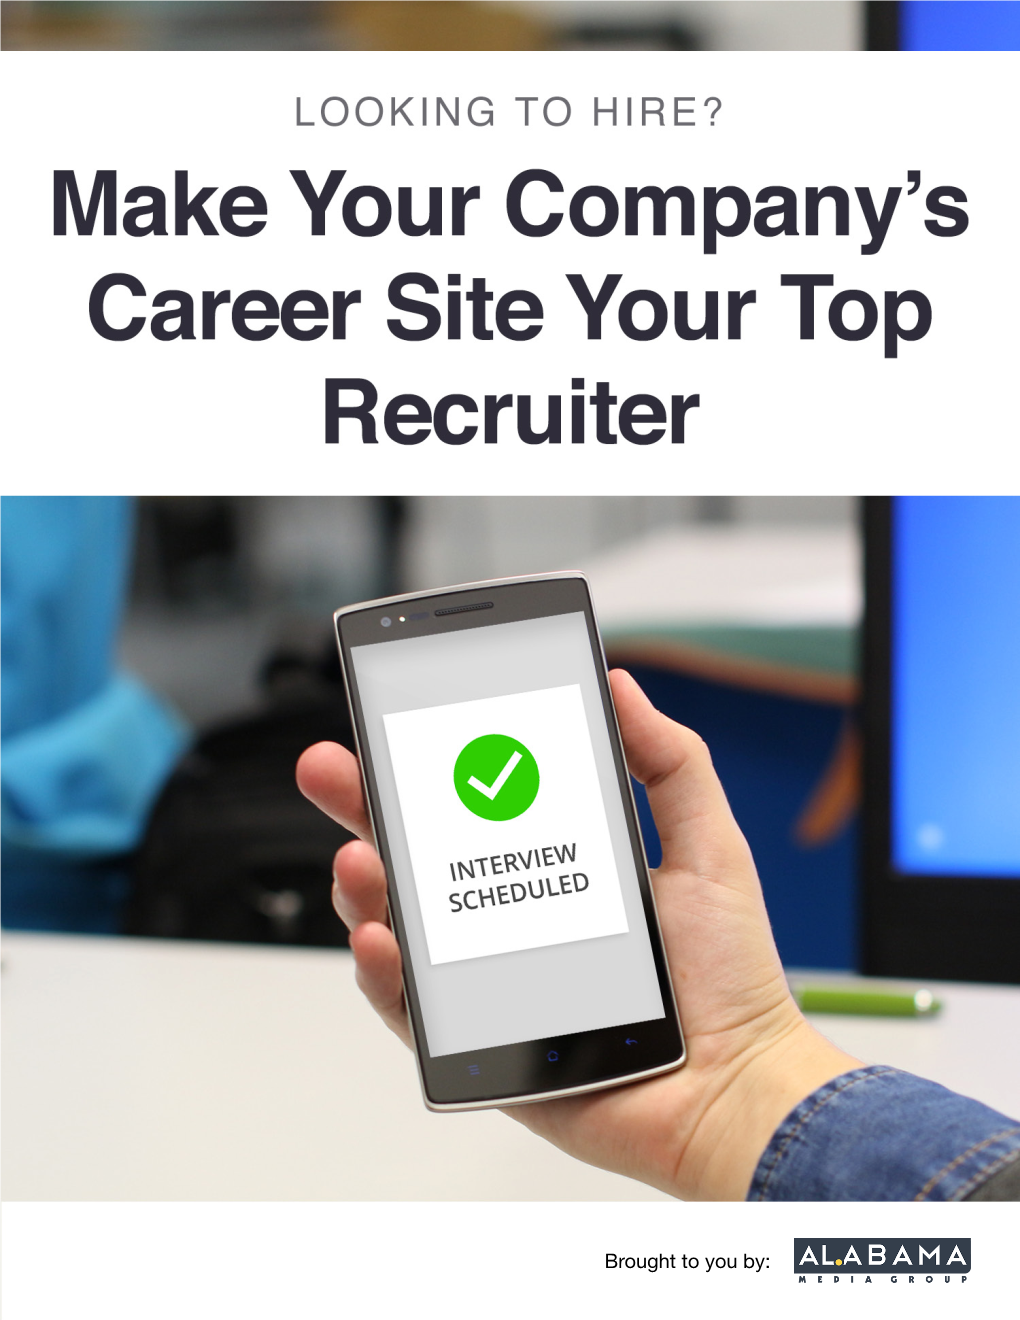 Brought to You By: 1 | Make Your Company’S Career Site Your Top Recruiter